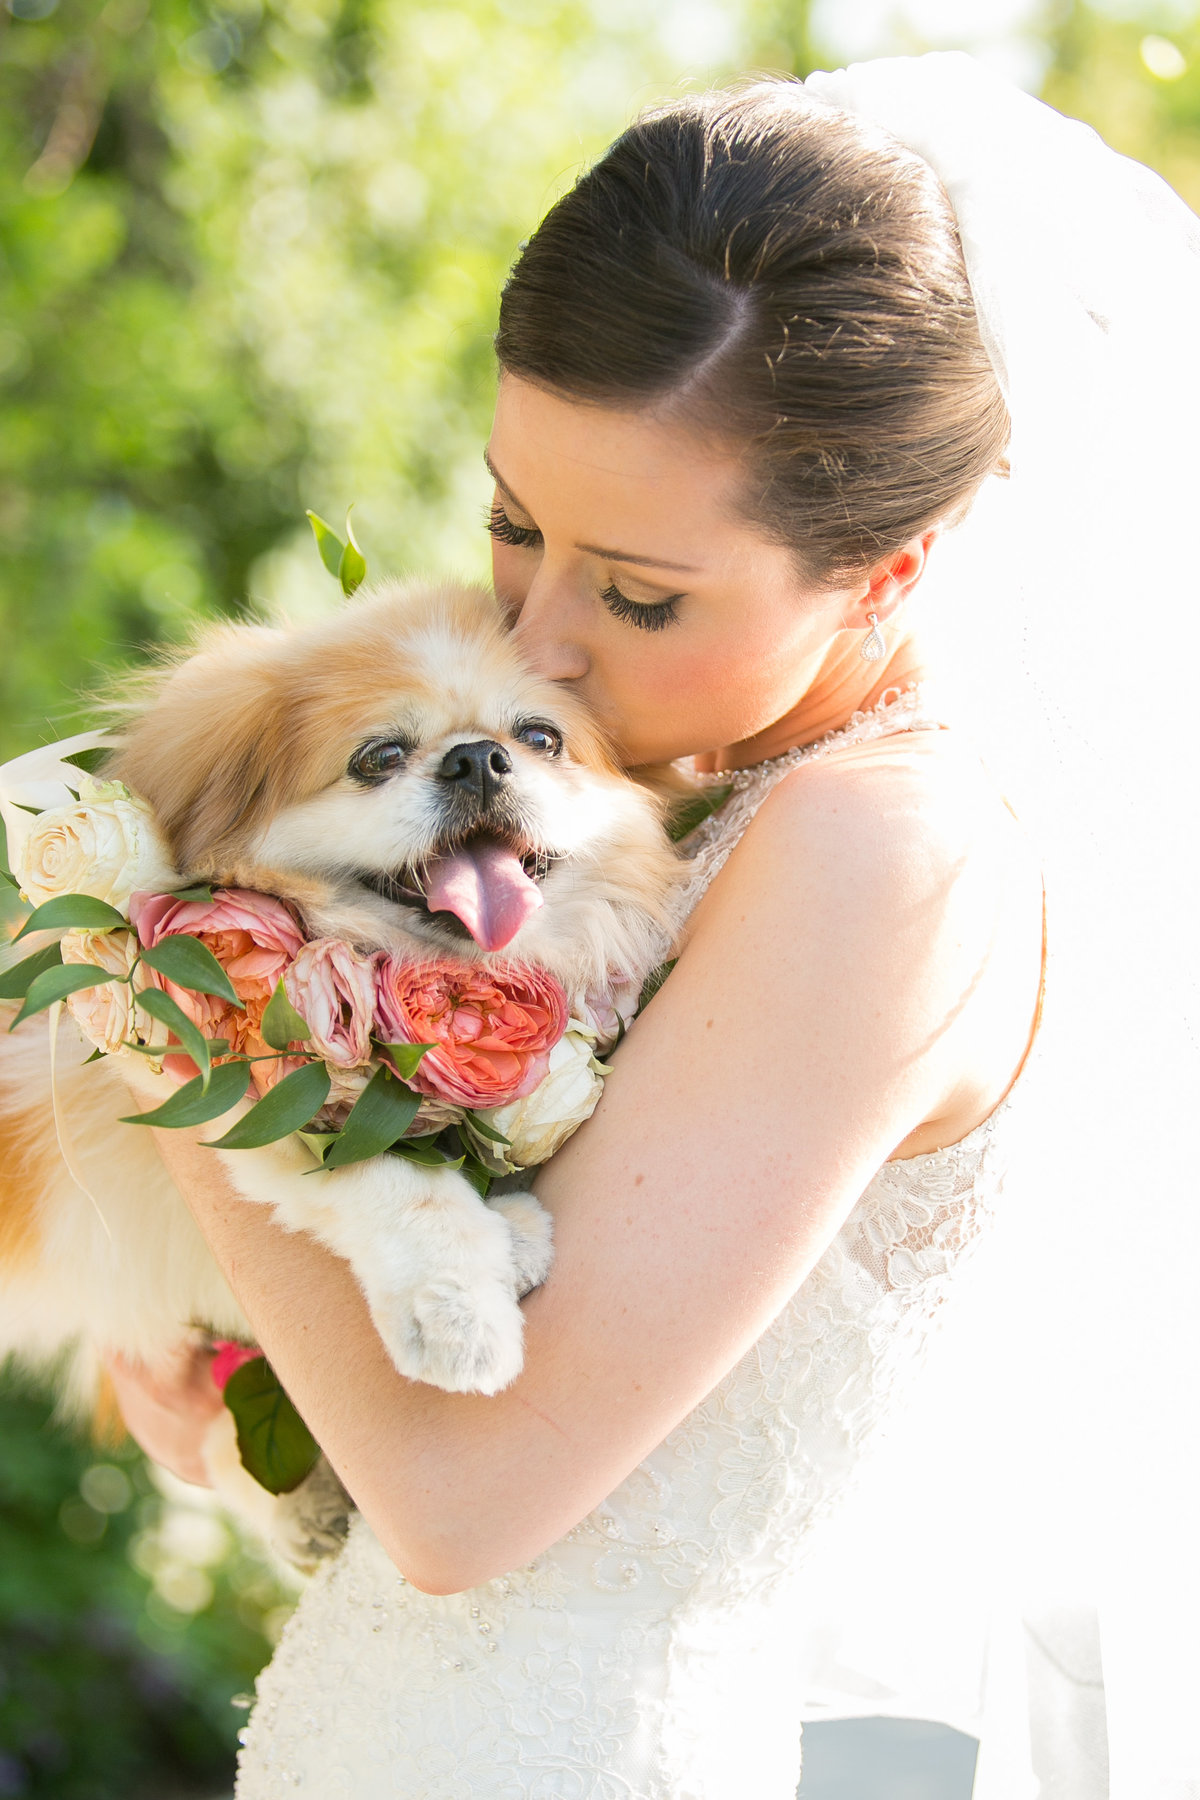 Bride with her dog on her wedding day